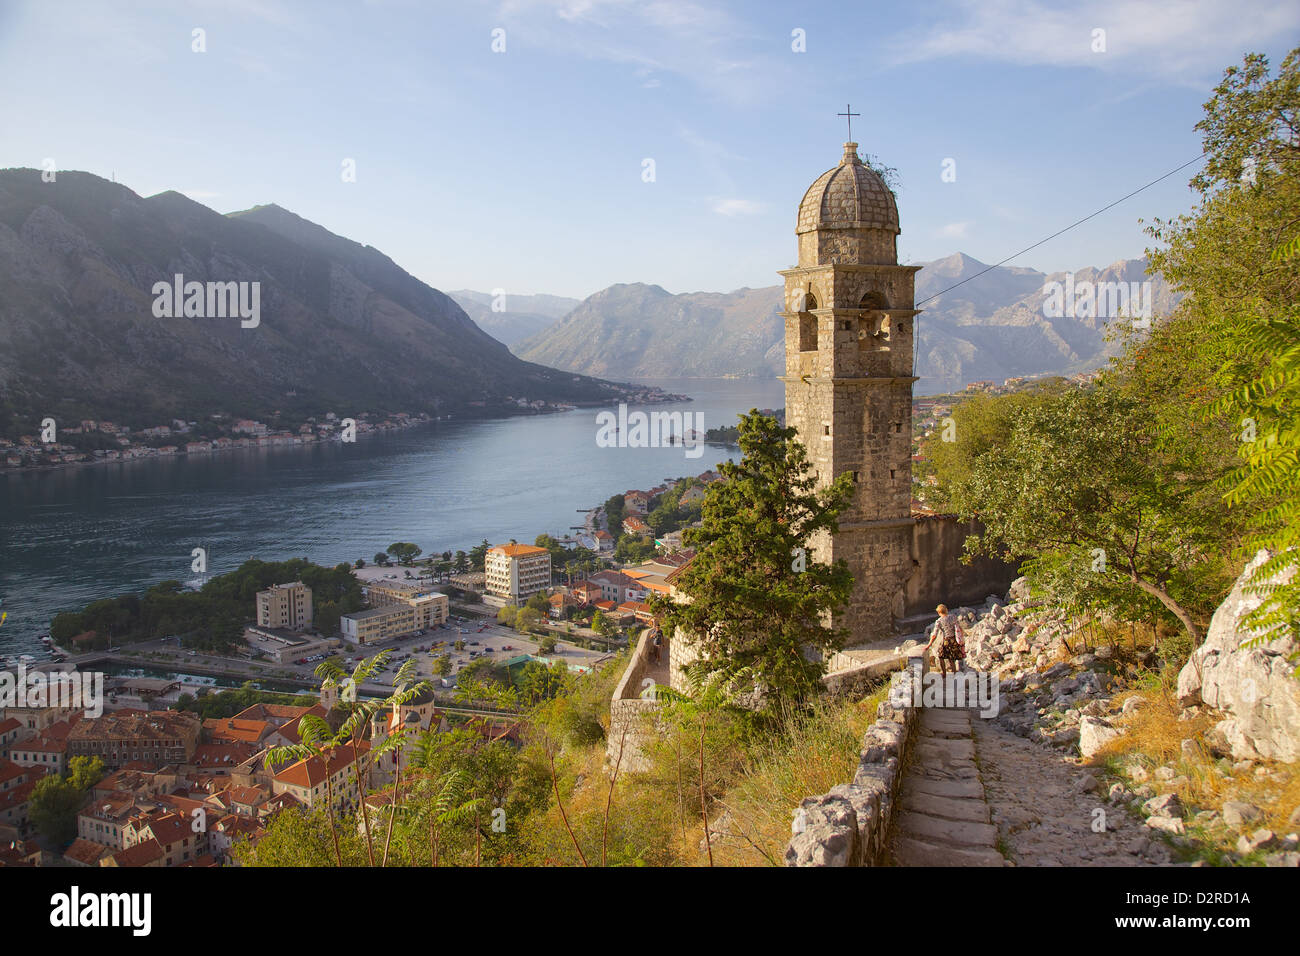 Chapel of Our Lady of Salvation and view over Old Town, Kotor, UNESCO World Heritage Site, Montenegro, Europe Stock Photo